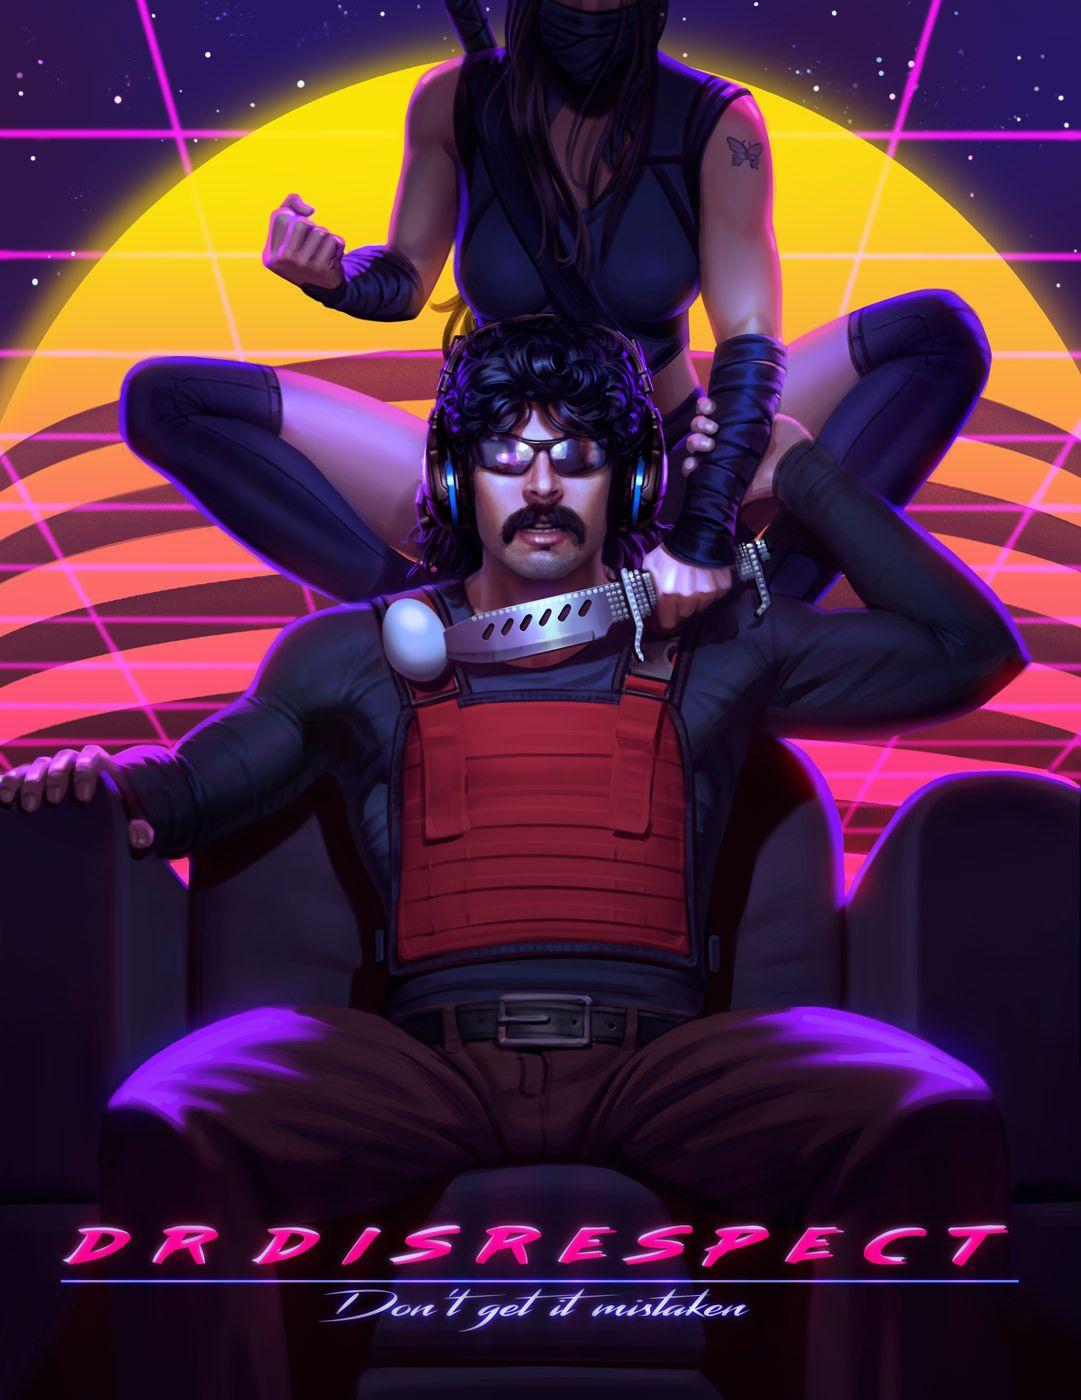 Dr Disrespect and his deadly wife. Cool shit. Game props